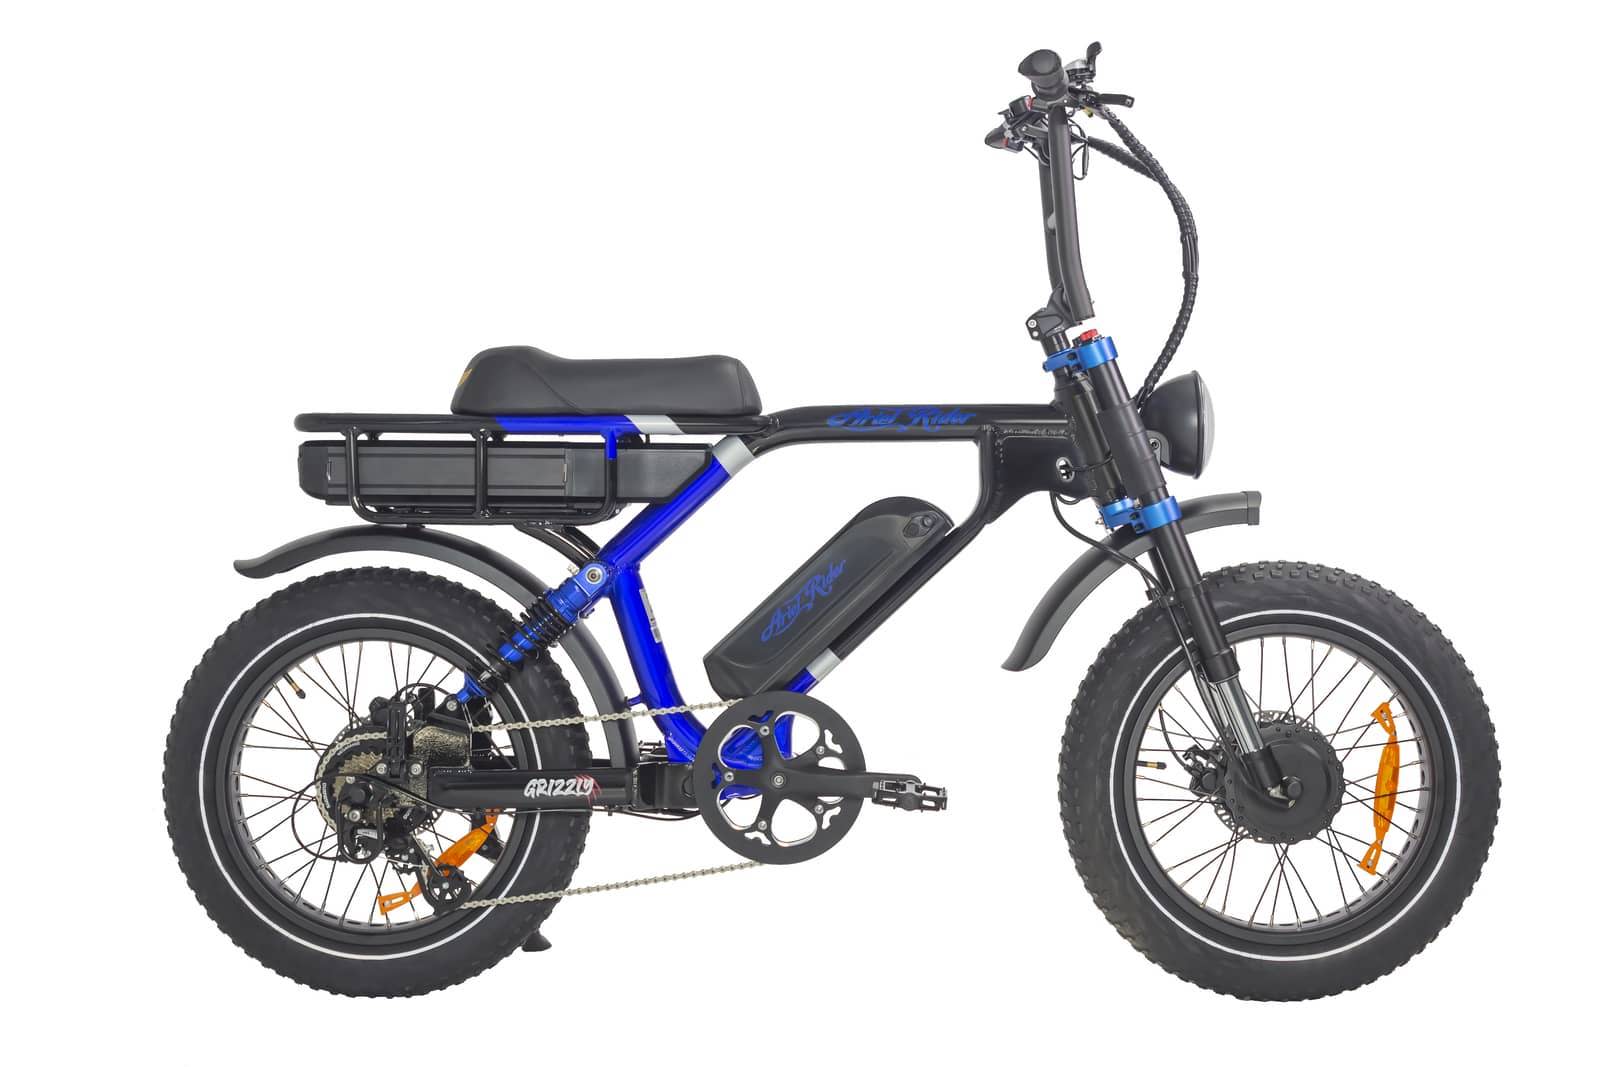 A photo of the Ariel Rider Grizzly ebike, featuring superior dual 1000W hub motors for exceptional power and speed on any terrain.